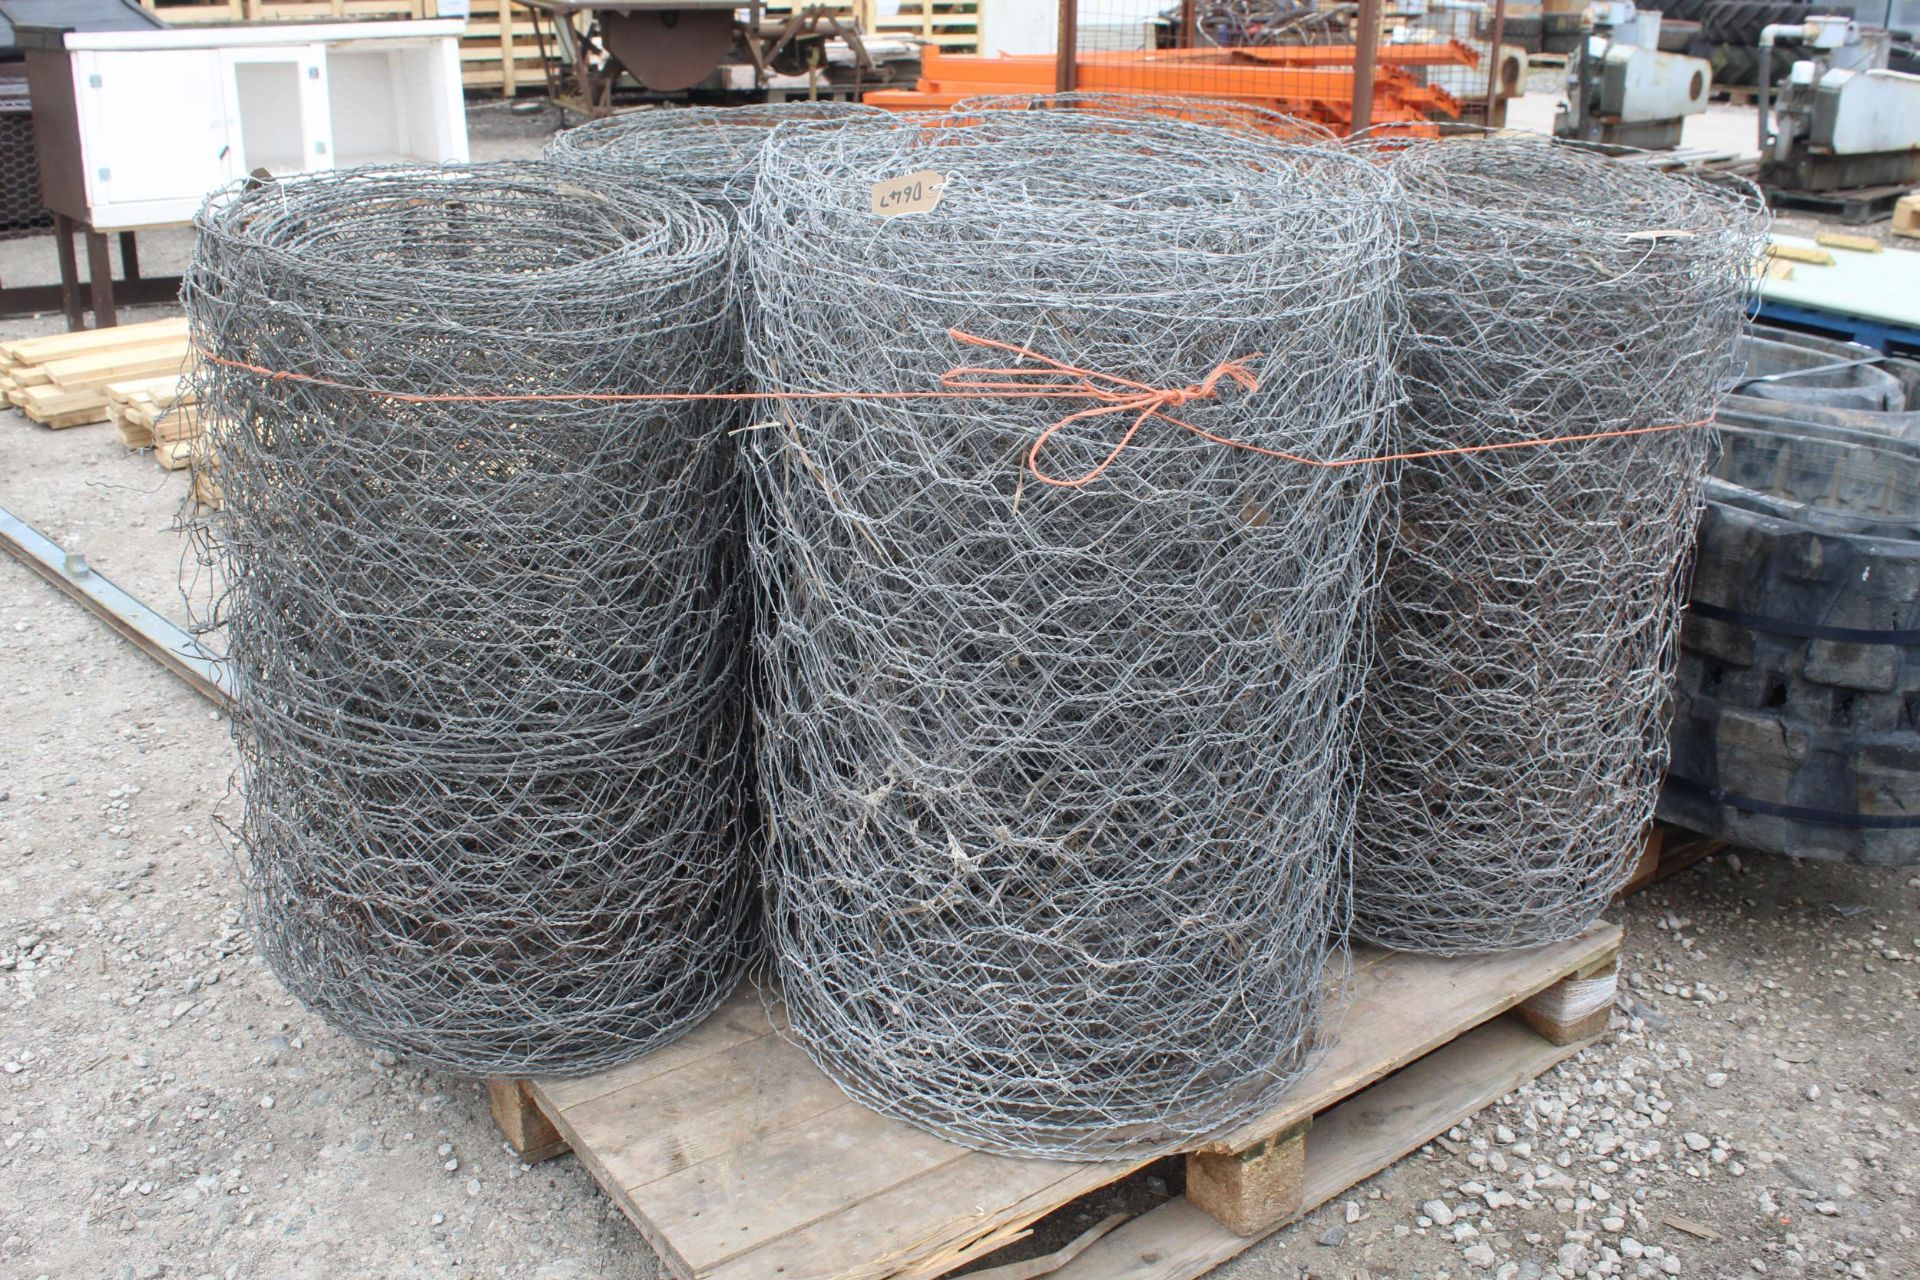 4 ROLLS OF WIRE NETTING 36" HIGH X 1 1/4" MESH AND 2 ROLLS 30" HIGH NO VAT